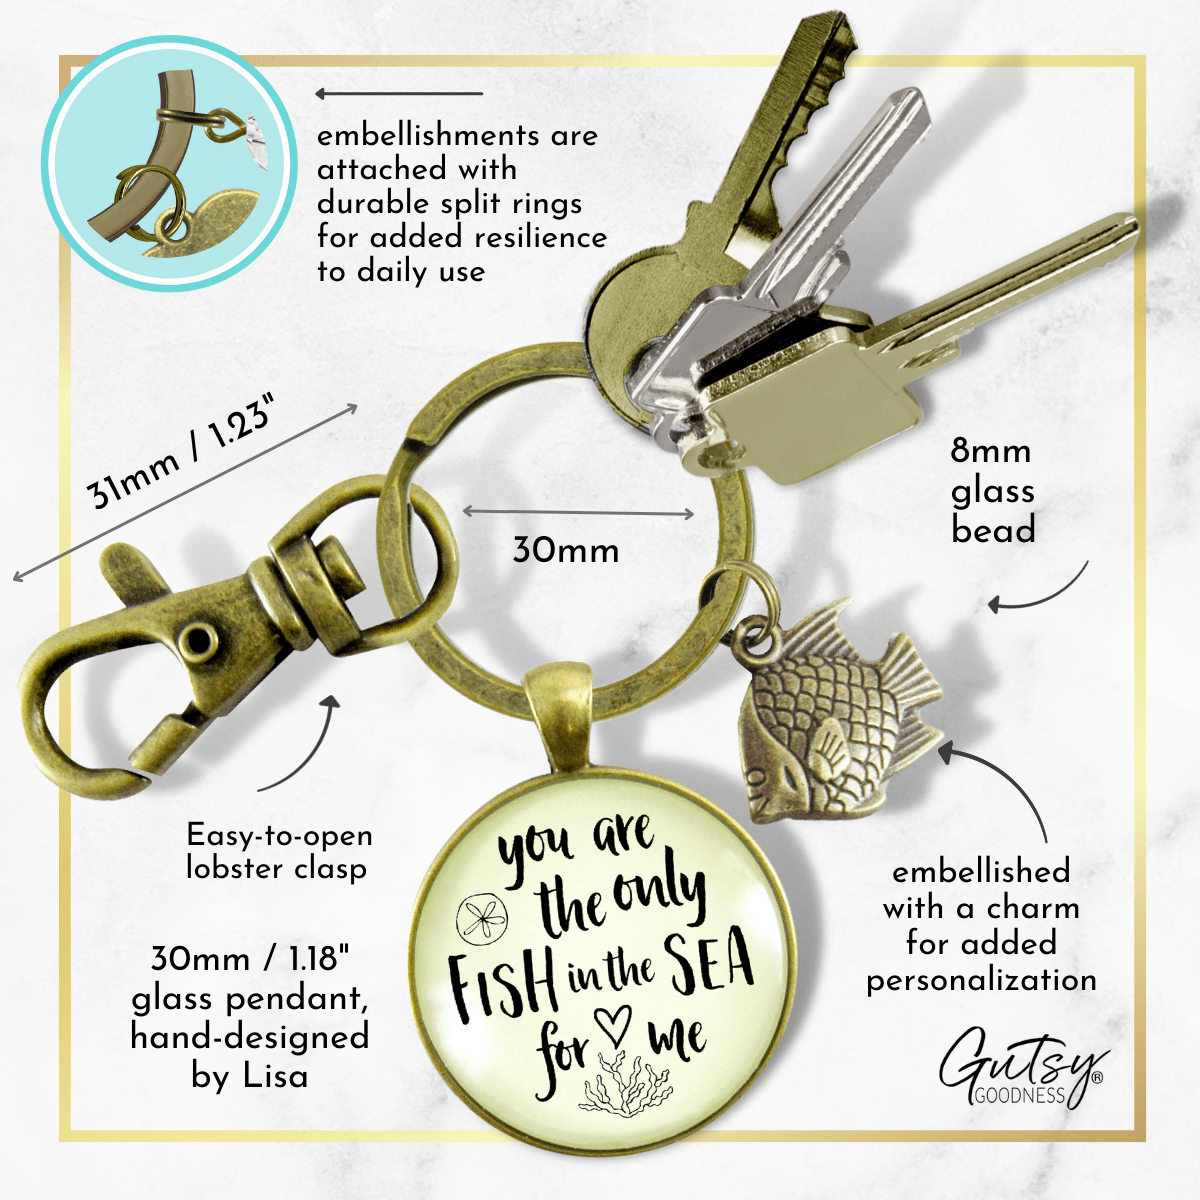 Fishing Couples Set Necklace Keychain You Are Only Fish In Sea Romantic Gift Match His Hers - Gutsy Goodness